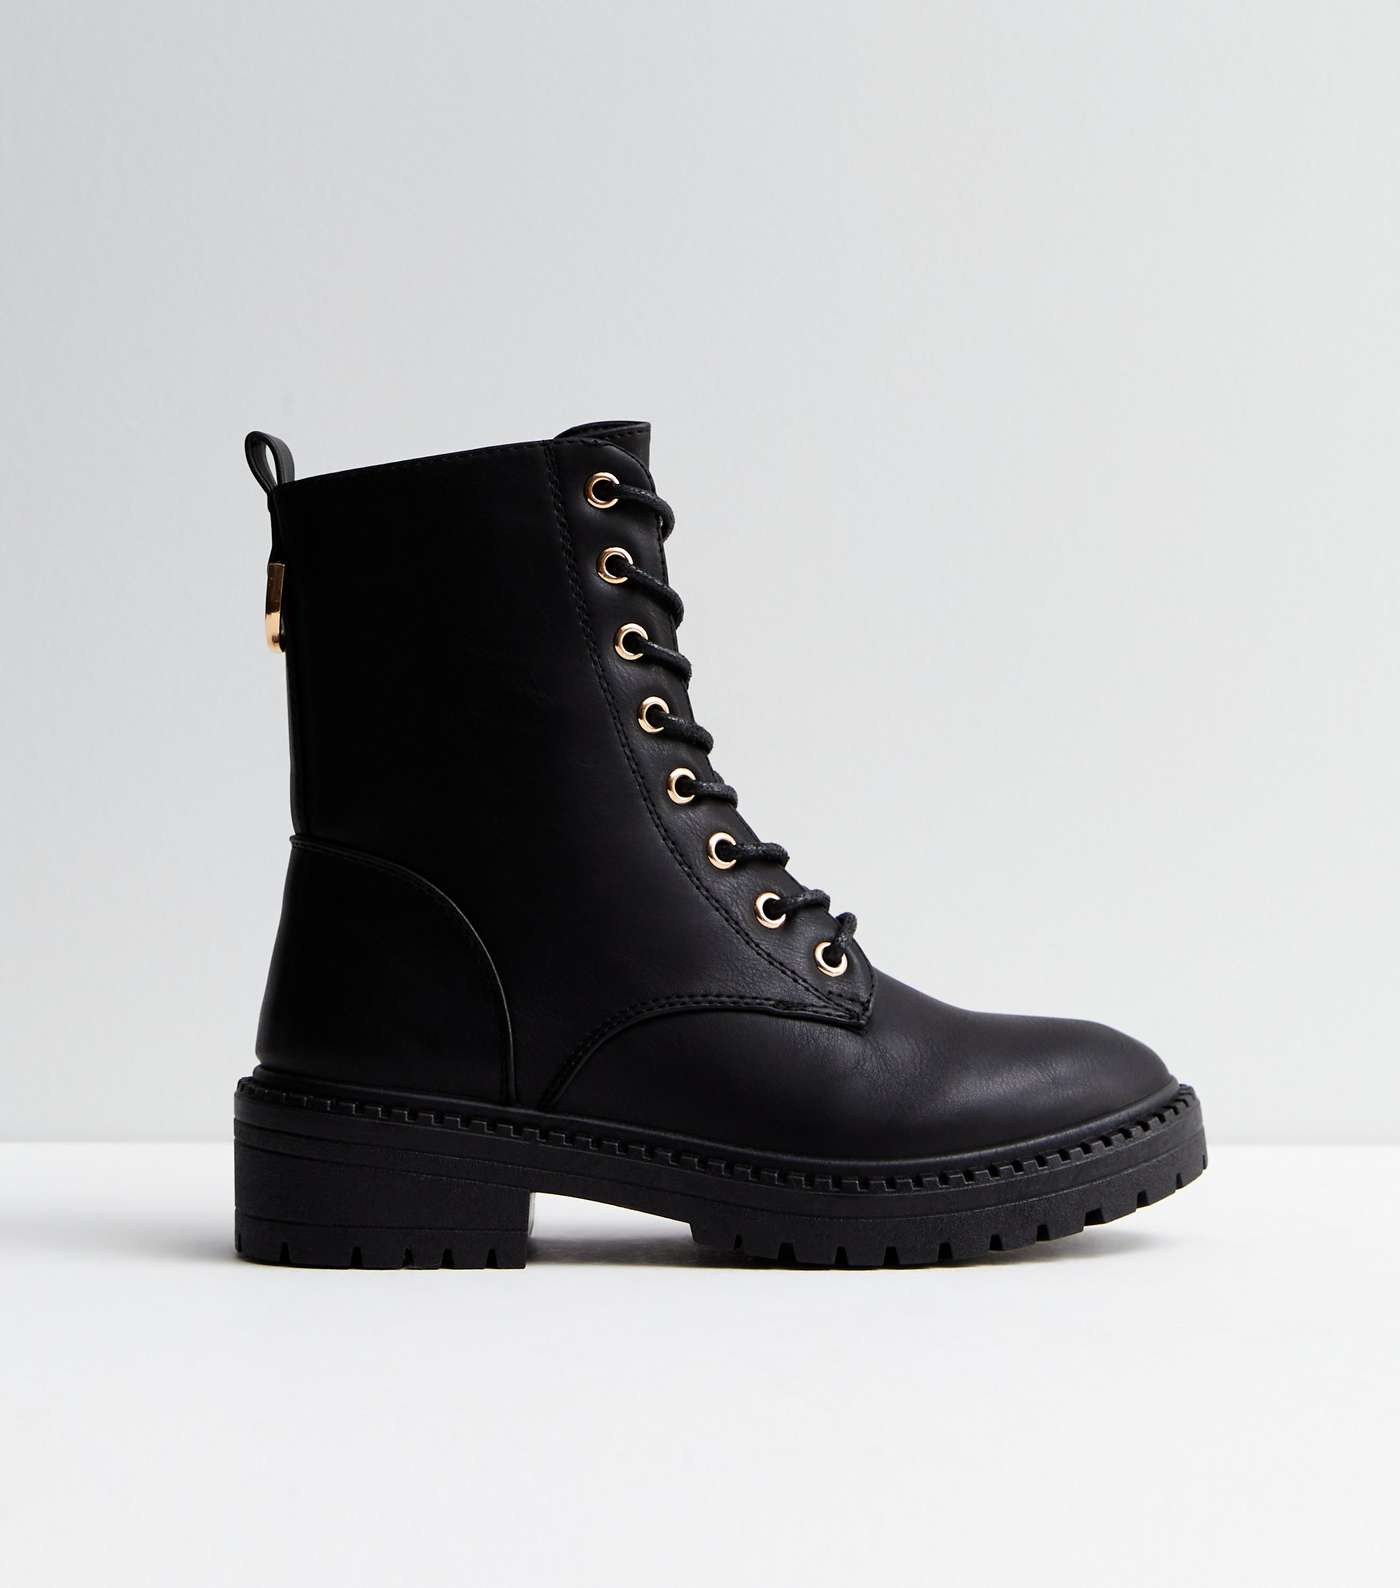 Black Leather-Look Lace Up Biker Boots Image 3